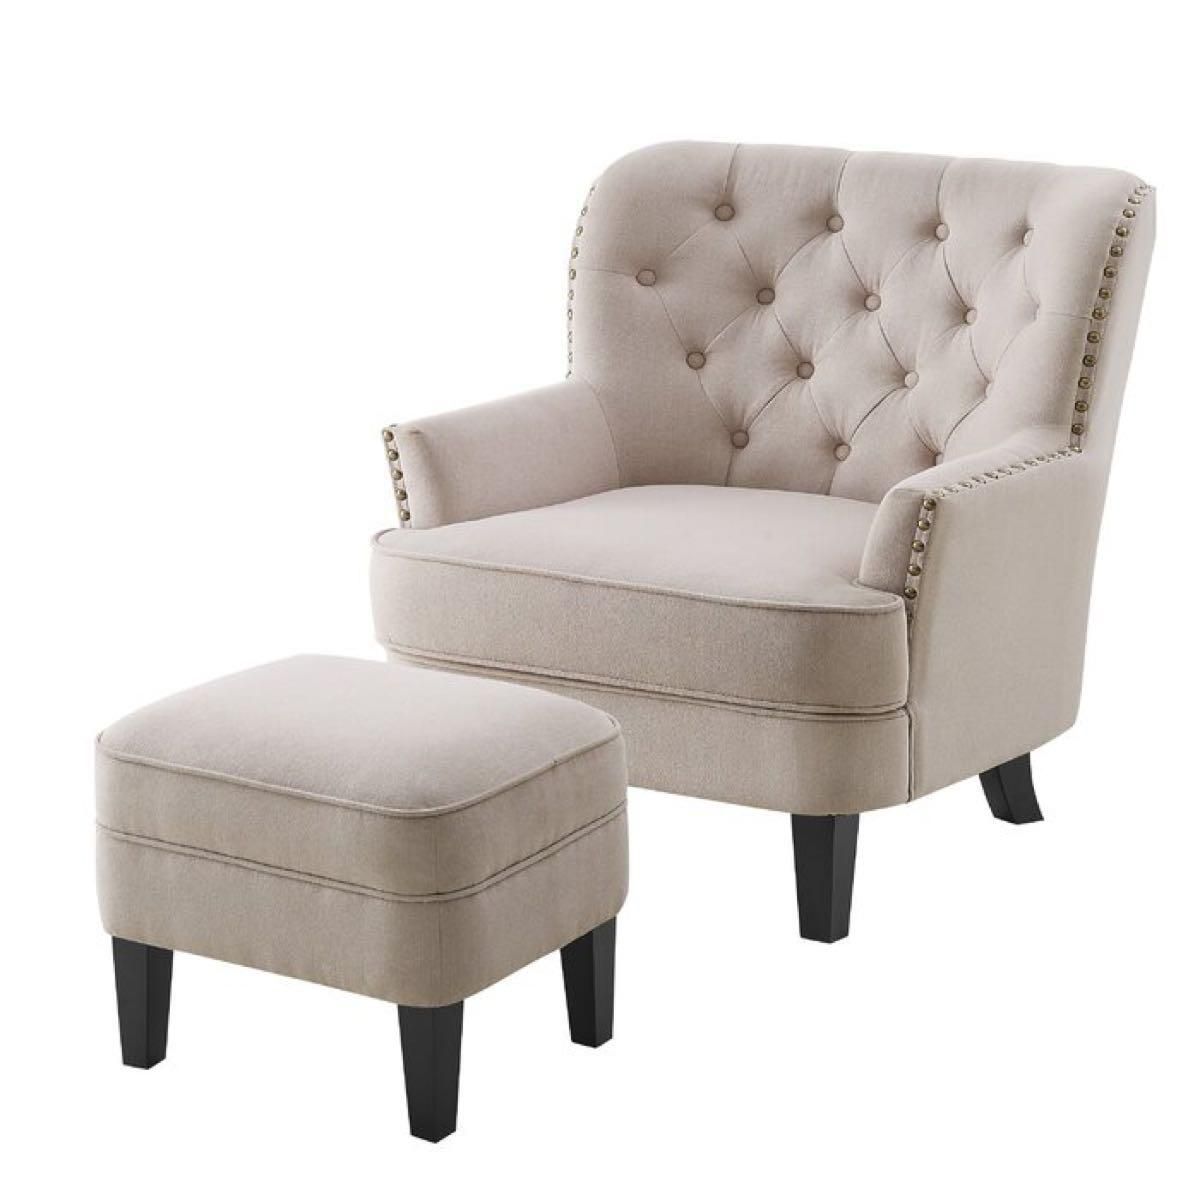 $140 · Kate Spade Pink — Nextdoor Pertaining To Michalak Cheswood Armchairs And Ottoman (View 7 of 15)